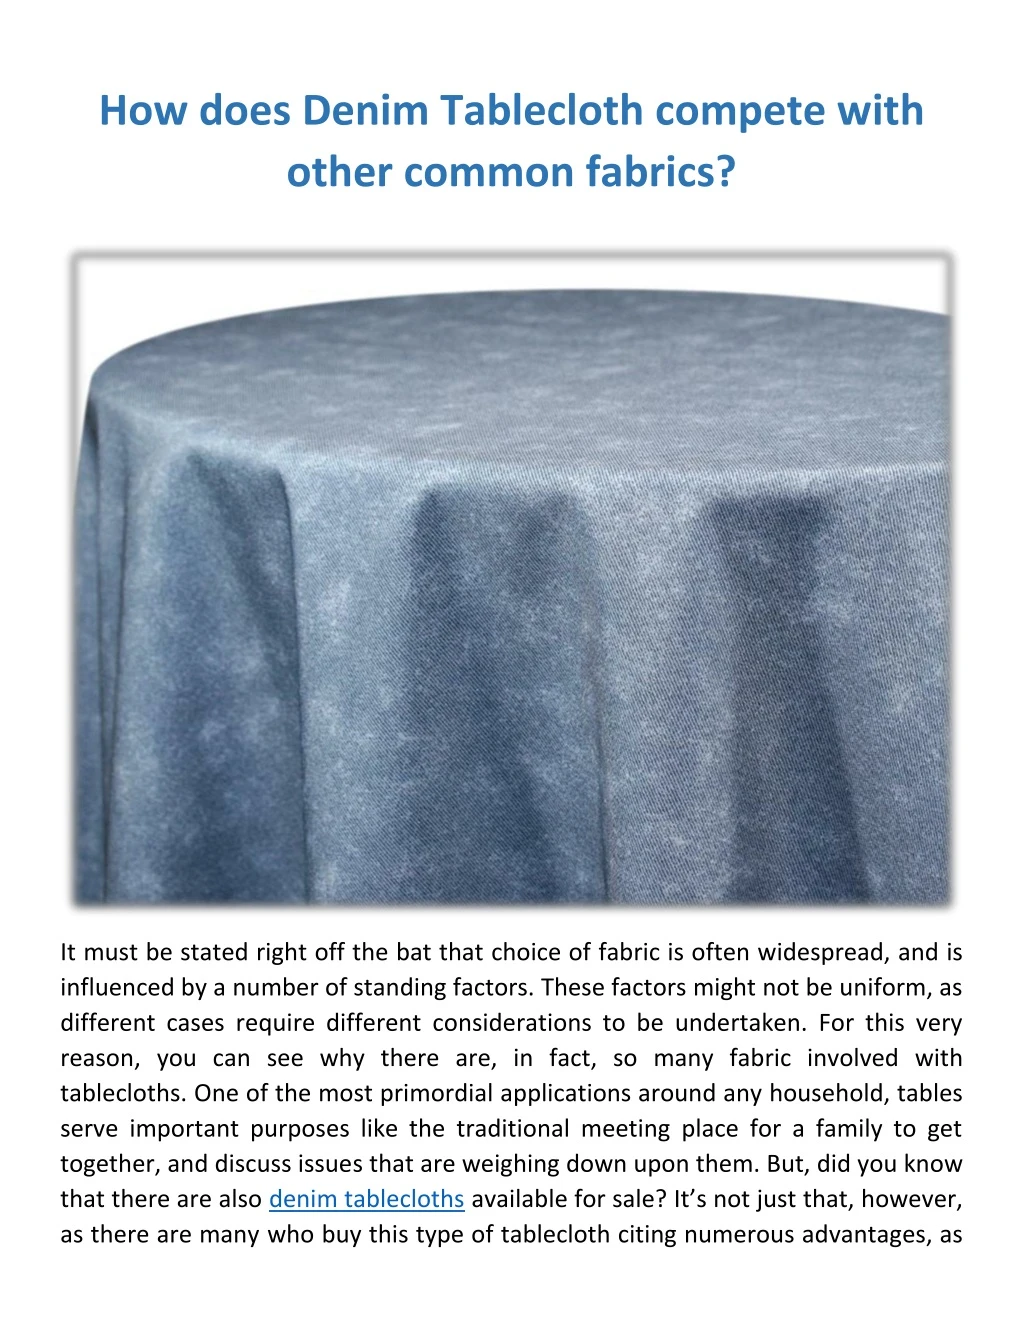 how does denim tablecloth compete with other